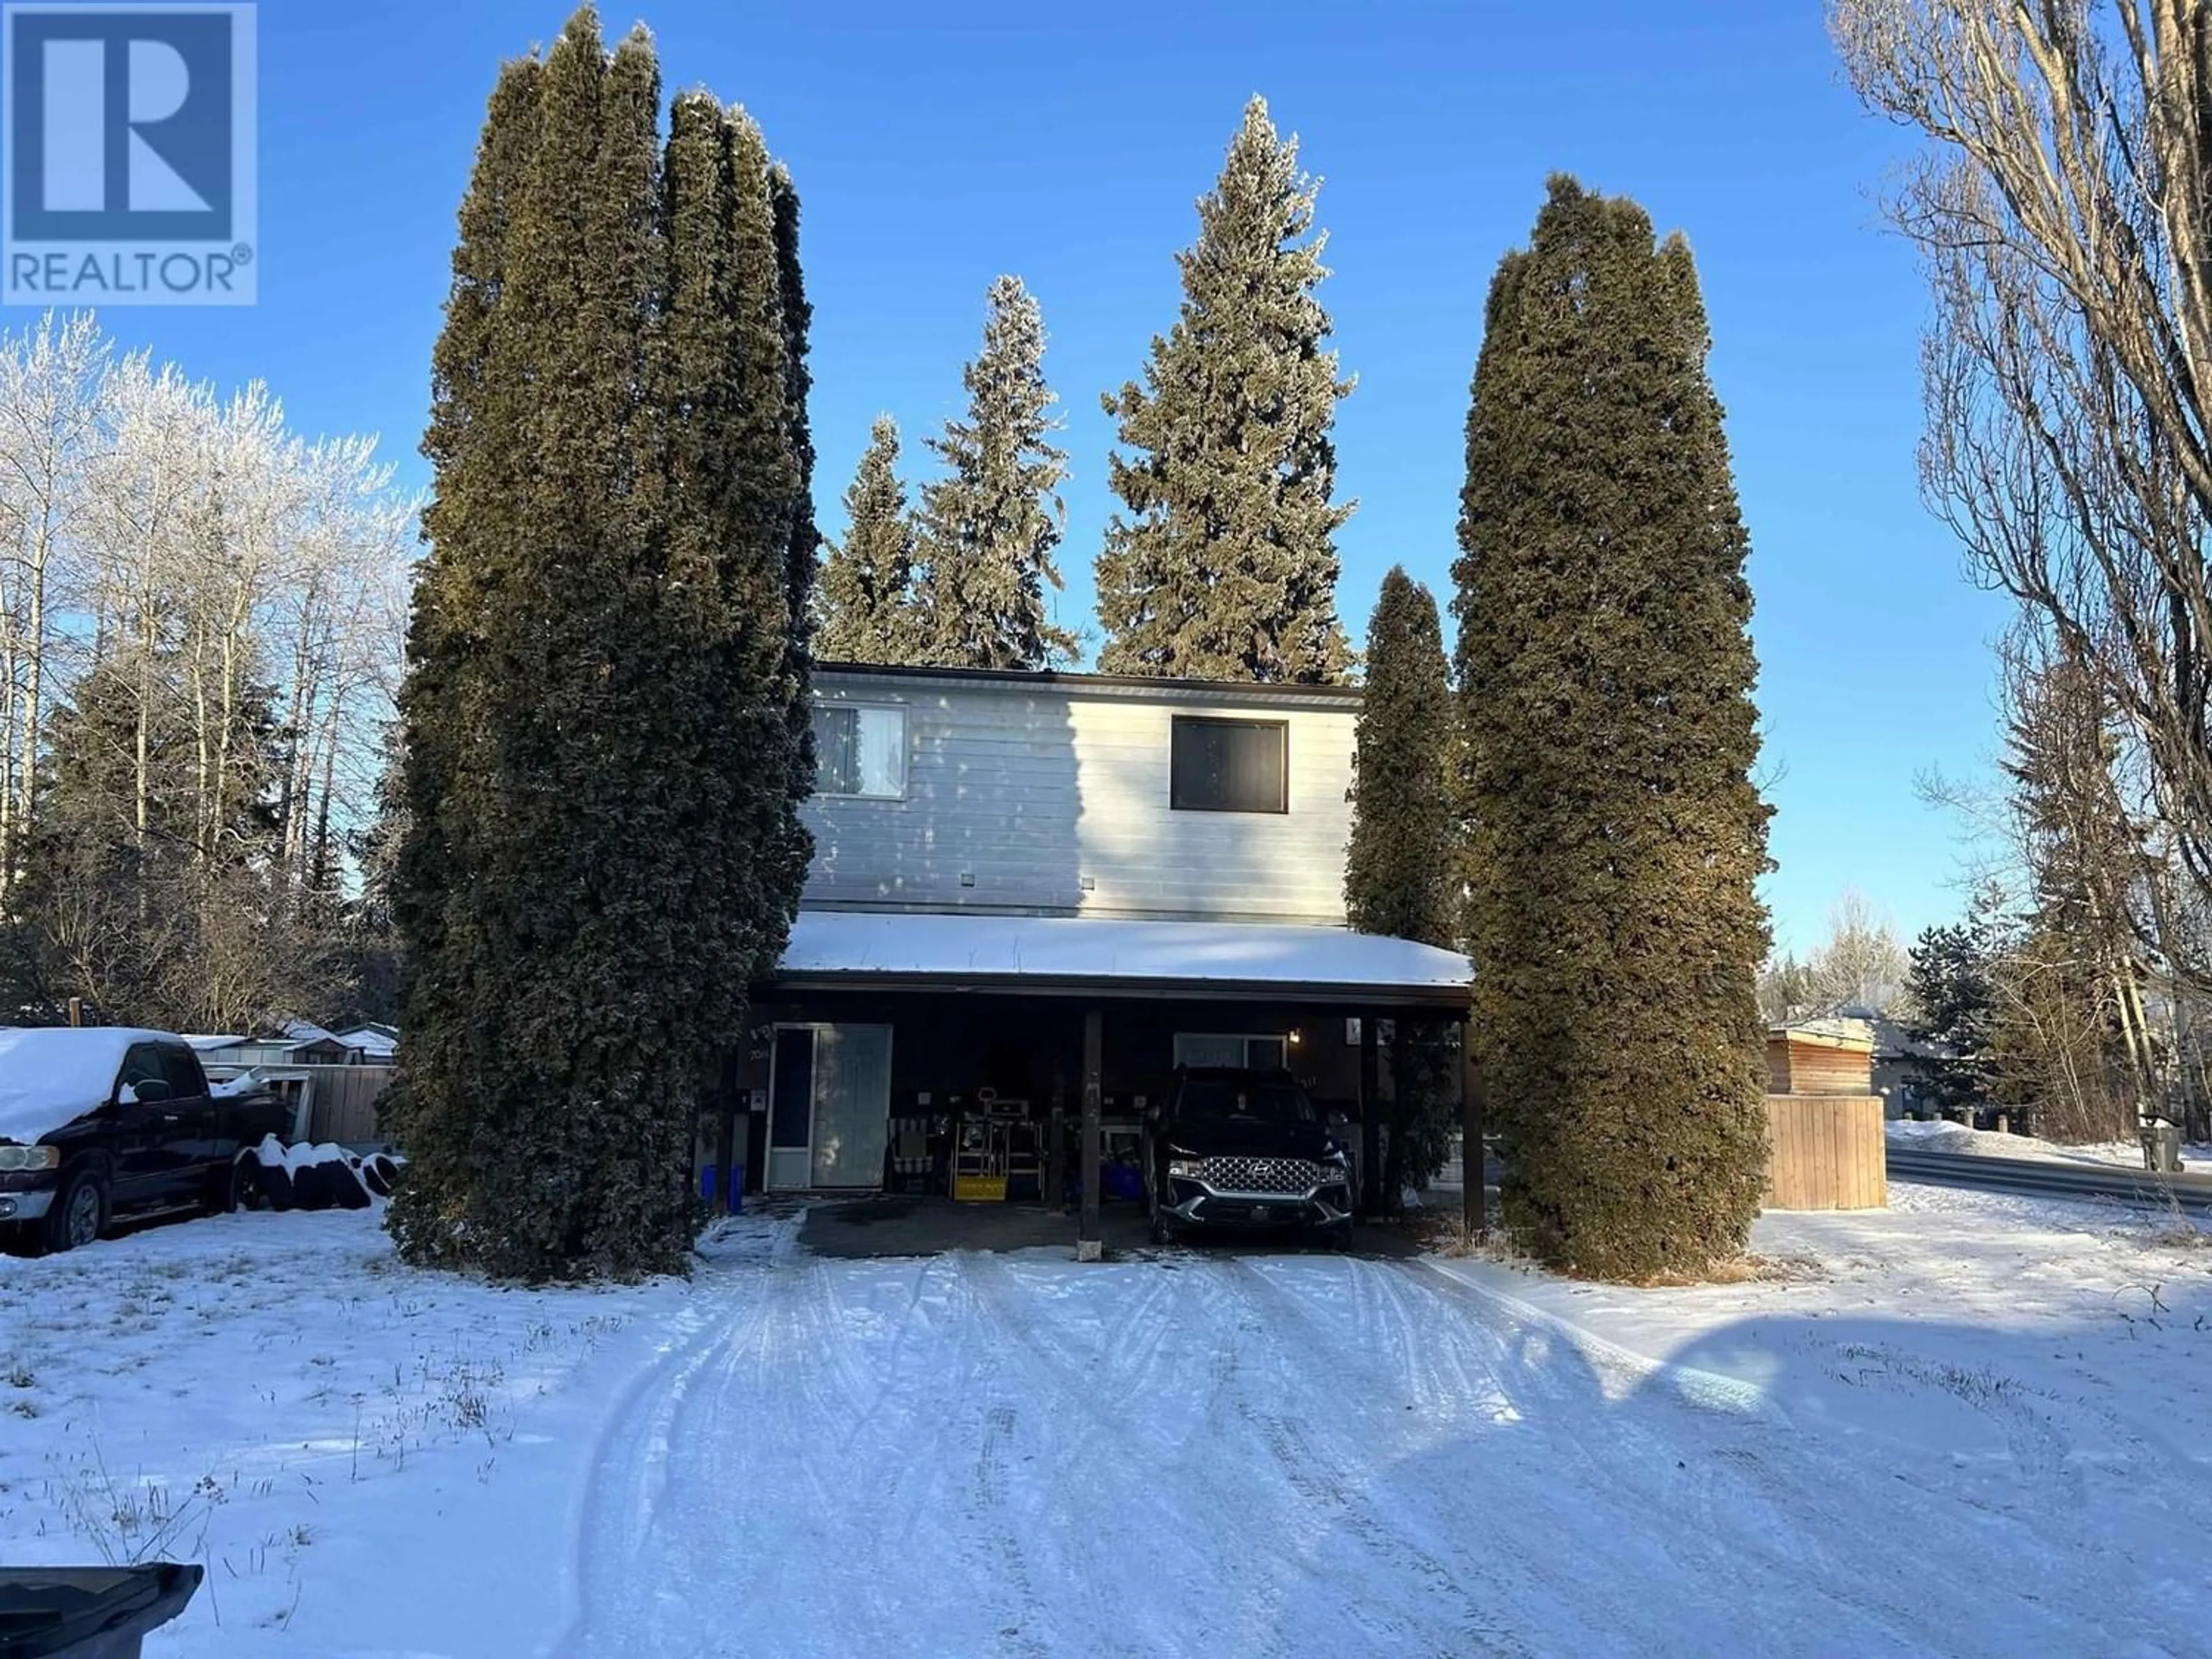 Outside view for 7011 GUELPH CRESCENT, Prince George British Columbia V2N3N9